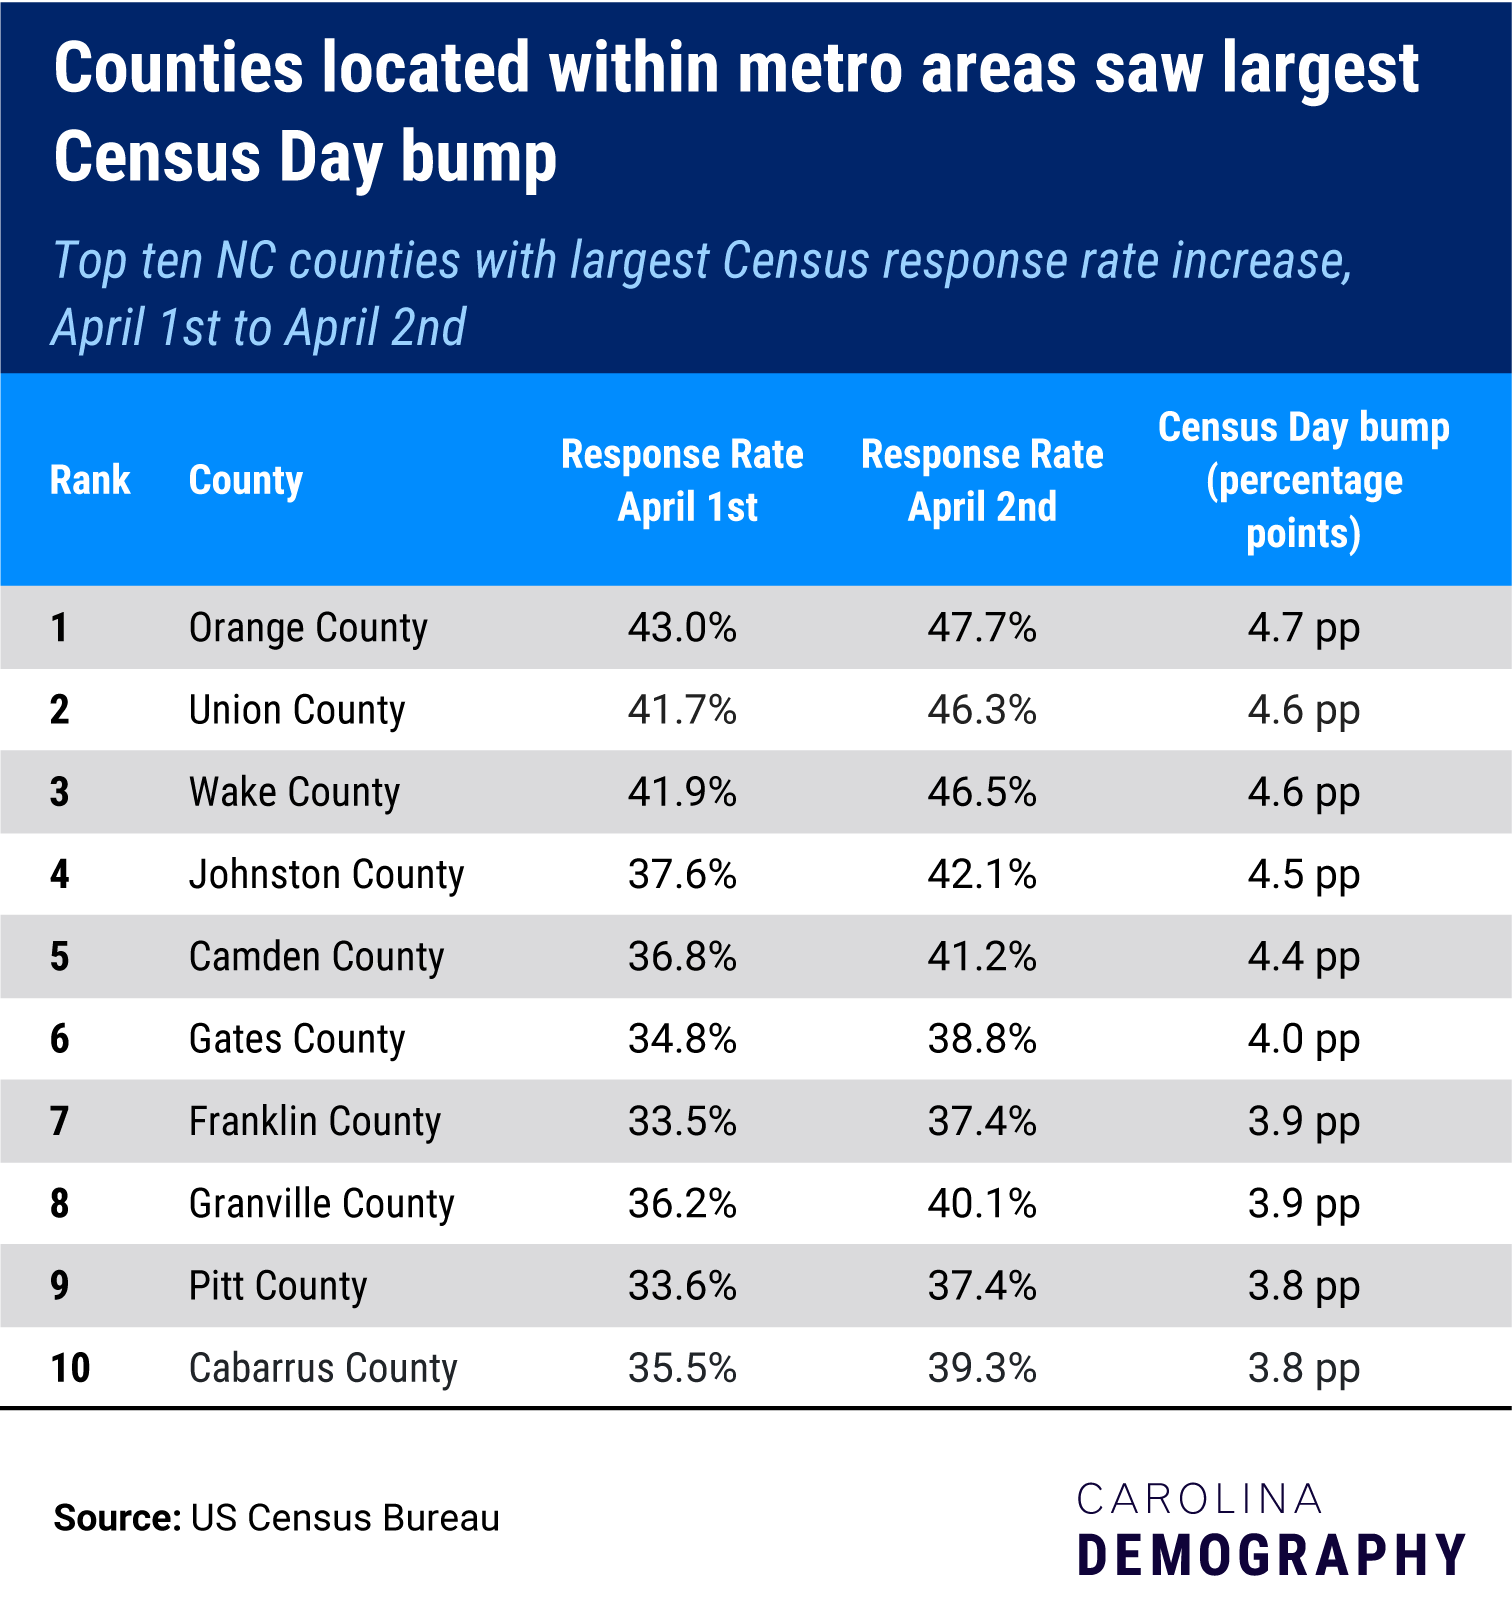 Table: counties located within metro areas saw largest census day bump. Top ten counties: 1 orange, 2 union, 3 wake, 4 johnston, 5 camden, 6 gates, 7 franklin, 8 granville, 9 pitt, 10 cabarrus